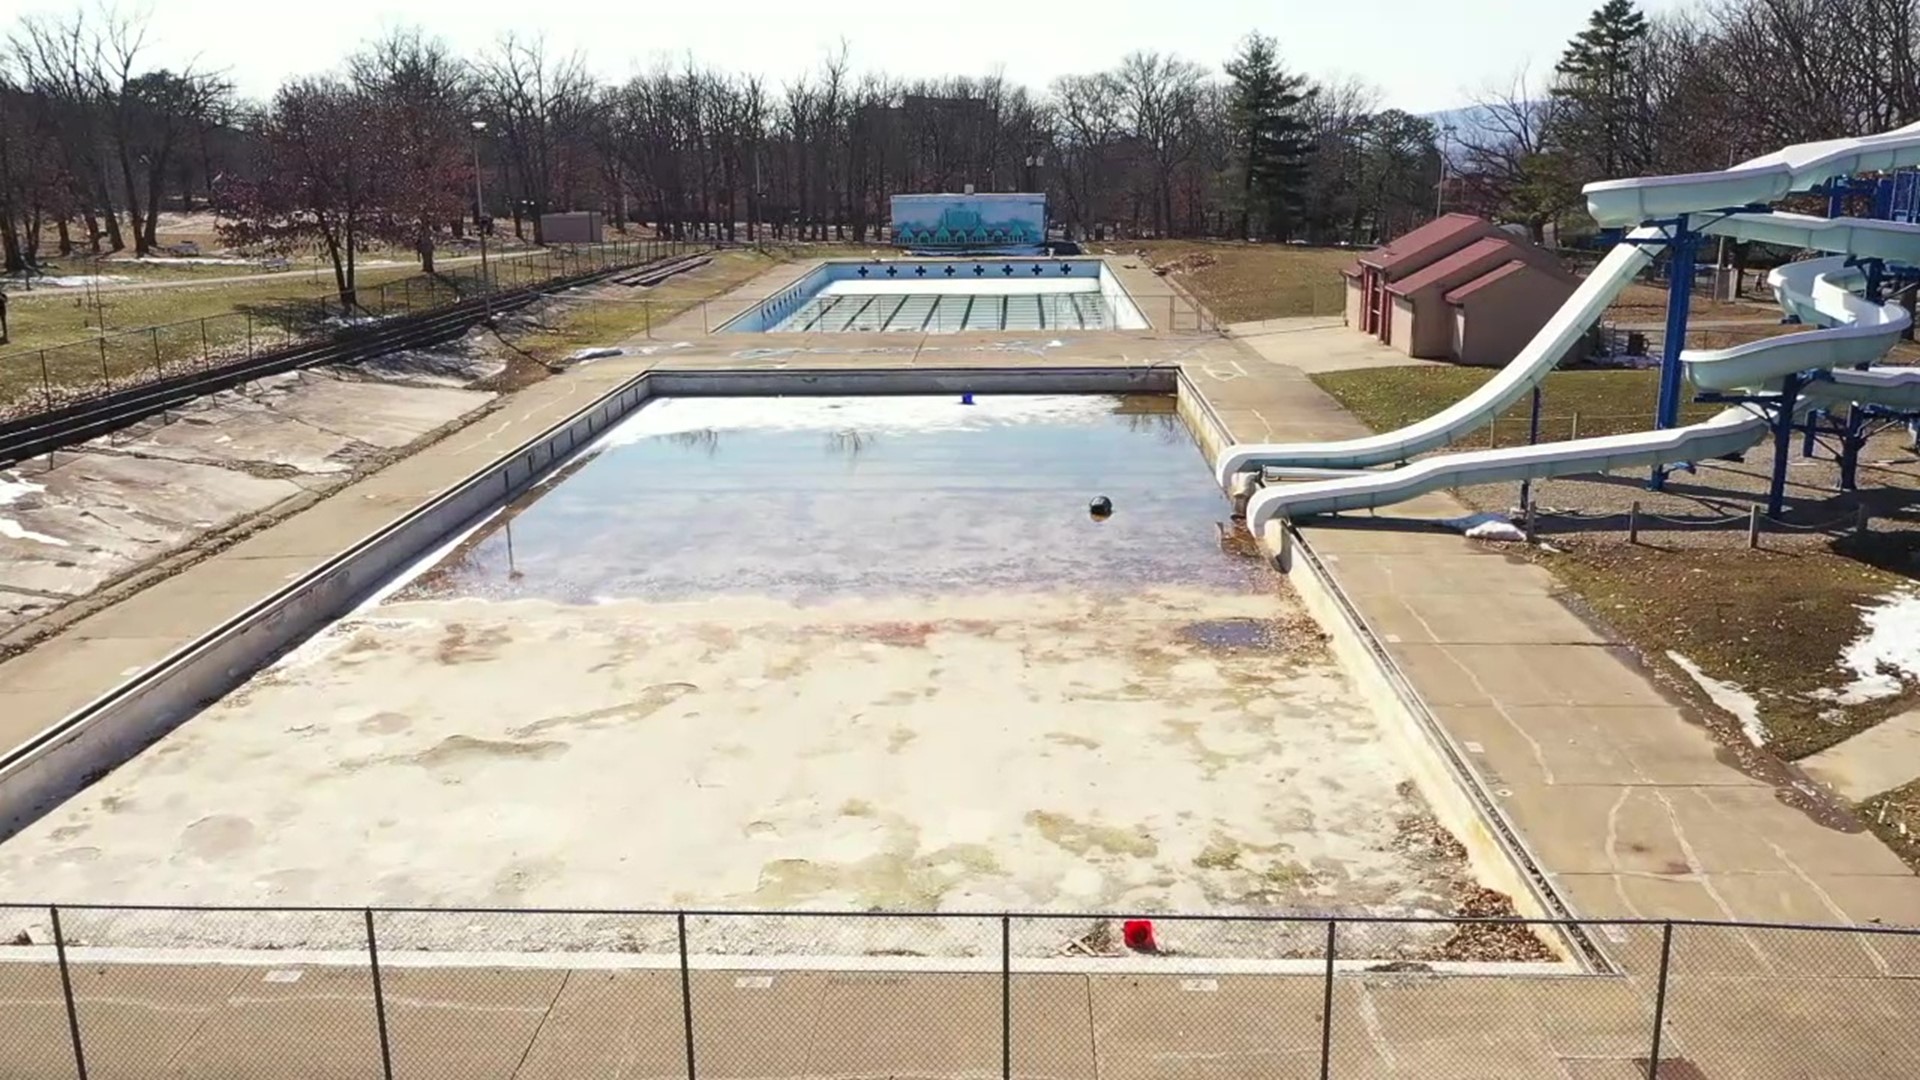 City officials say the Nay Aug pool complex in Scranton will not open for swimmers this year citing a big bill for needed repairs.